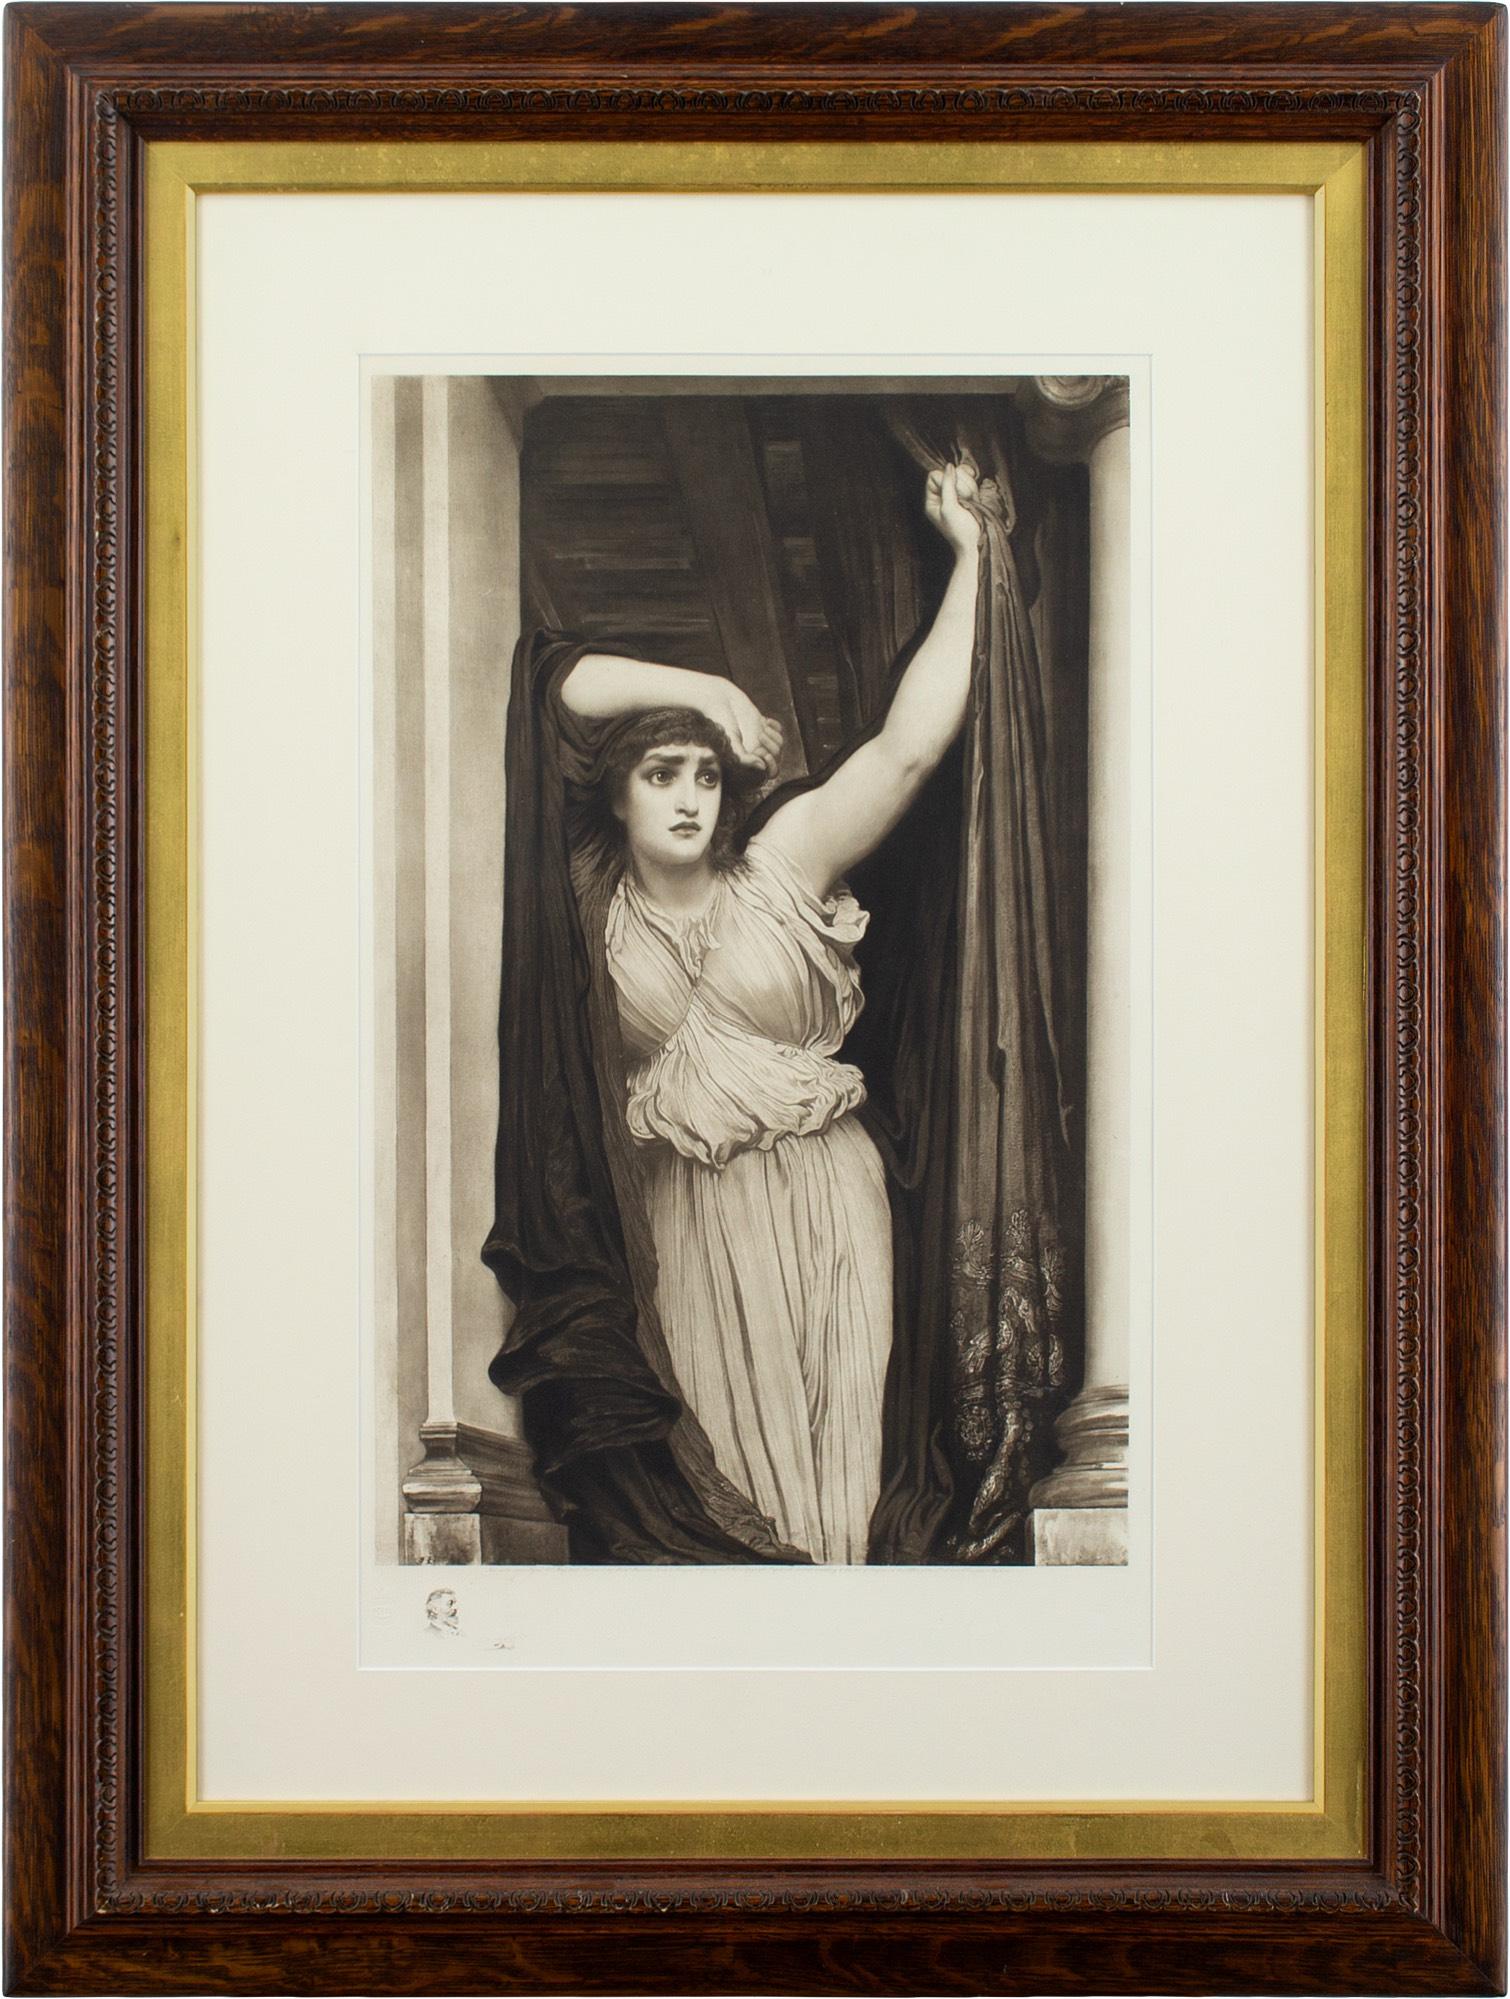 Frederic Leighton Figurative Print - Frederic Lord Leighton (After), The Last Watch Of Hero, Gravure